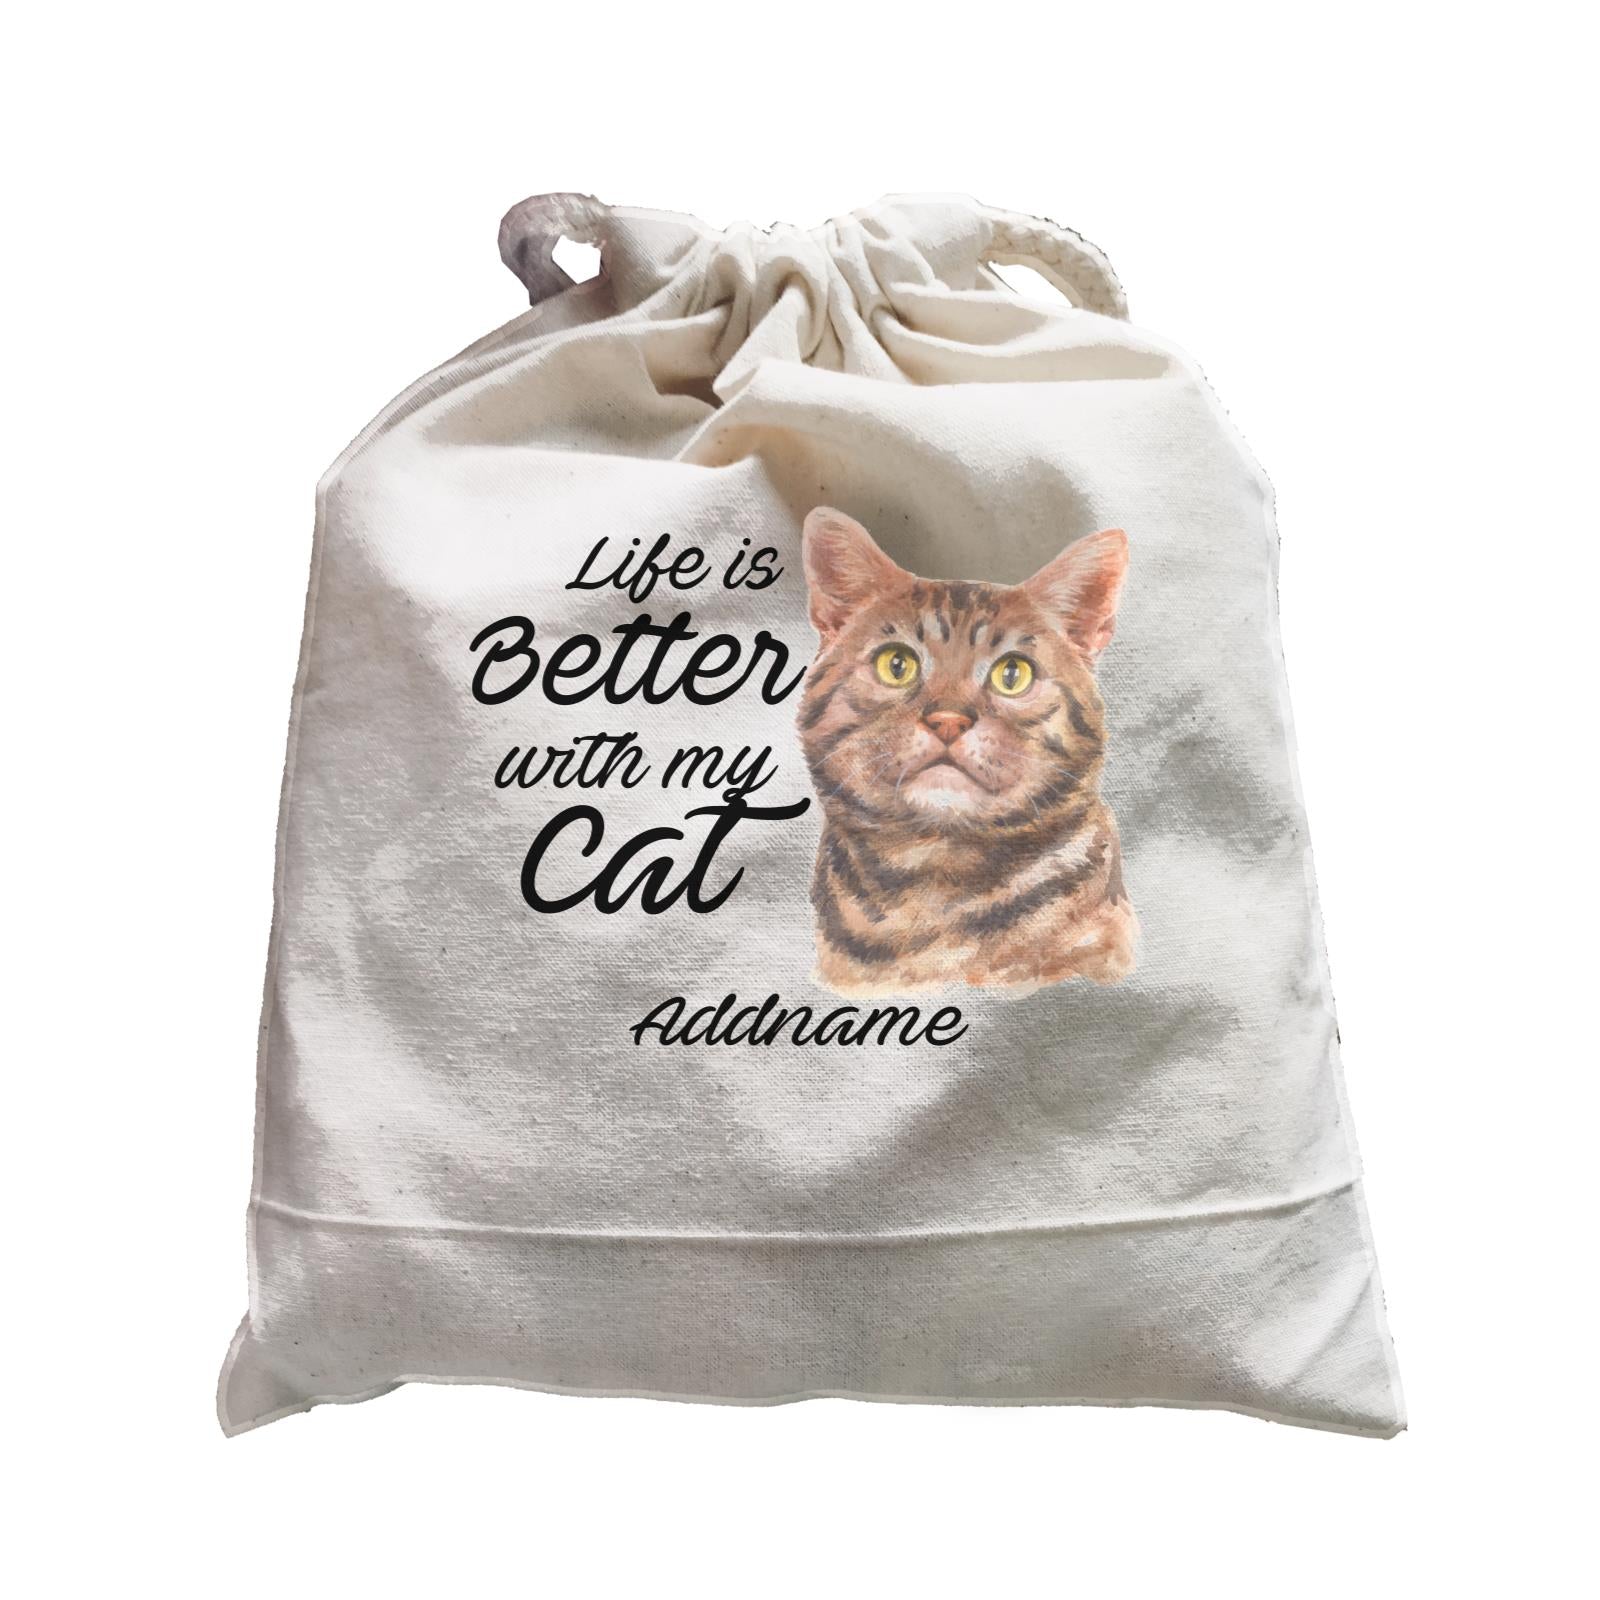 Watercolor Life is Better With My Cat Brown American Shorthair Cat Addname Satchel